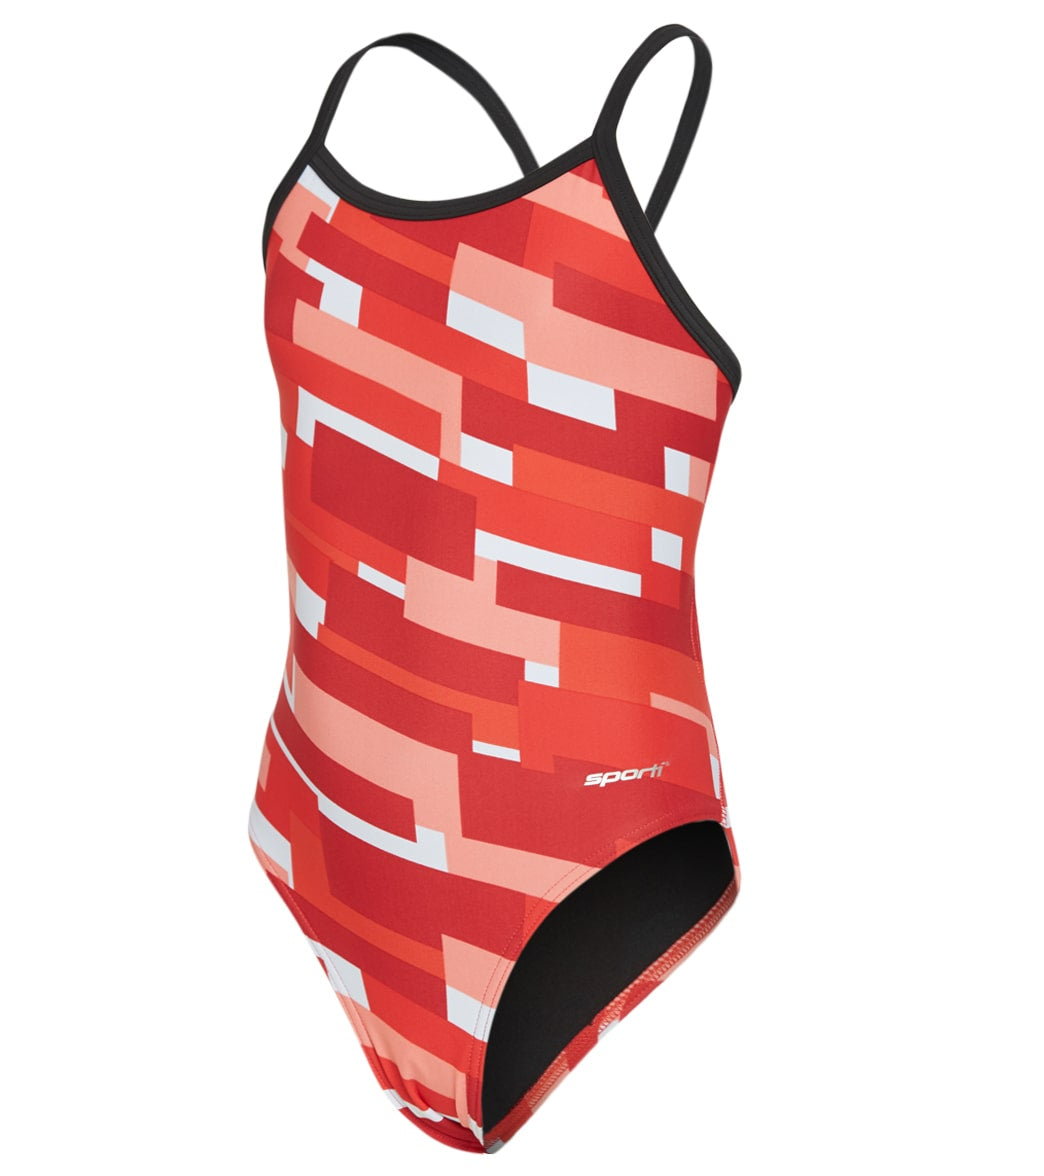 Sporti Cubism Thin Strap One Piece Swimsuit Youth 22-28 - Red Multi 24Y - Swimoutlet.com